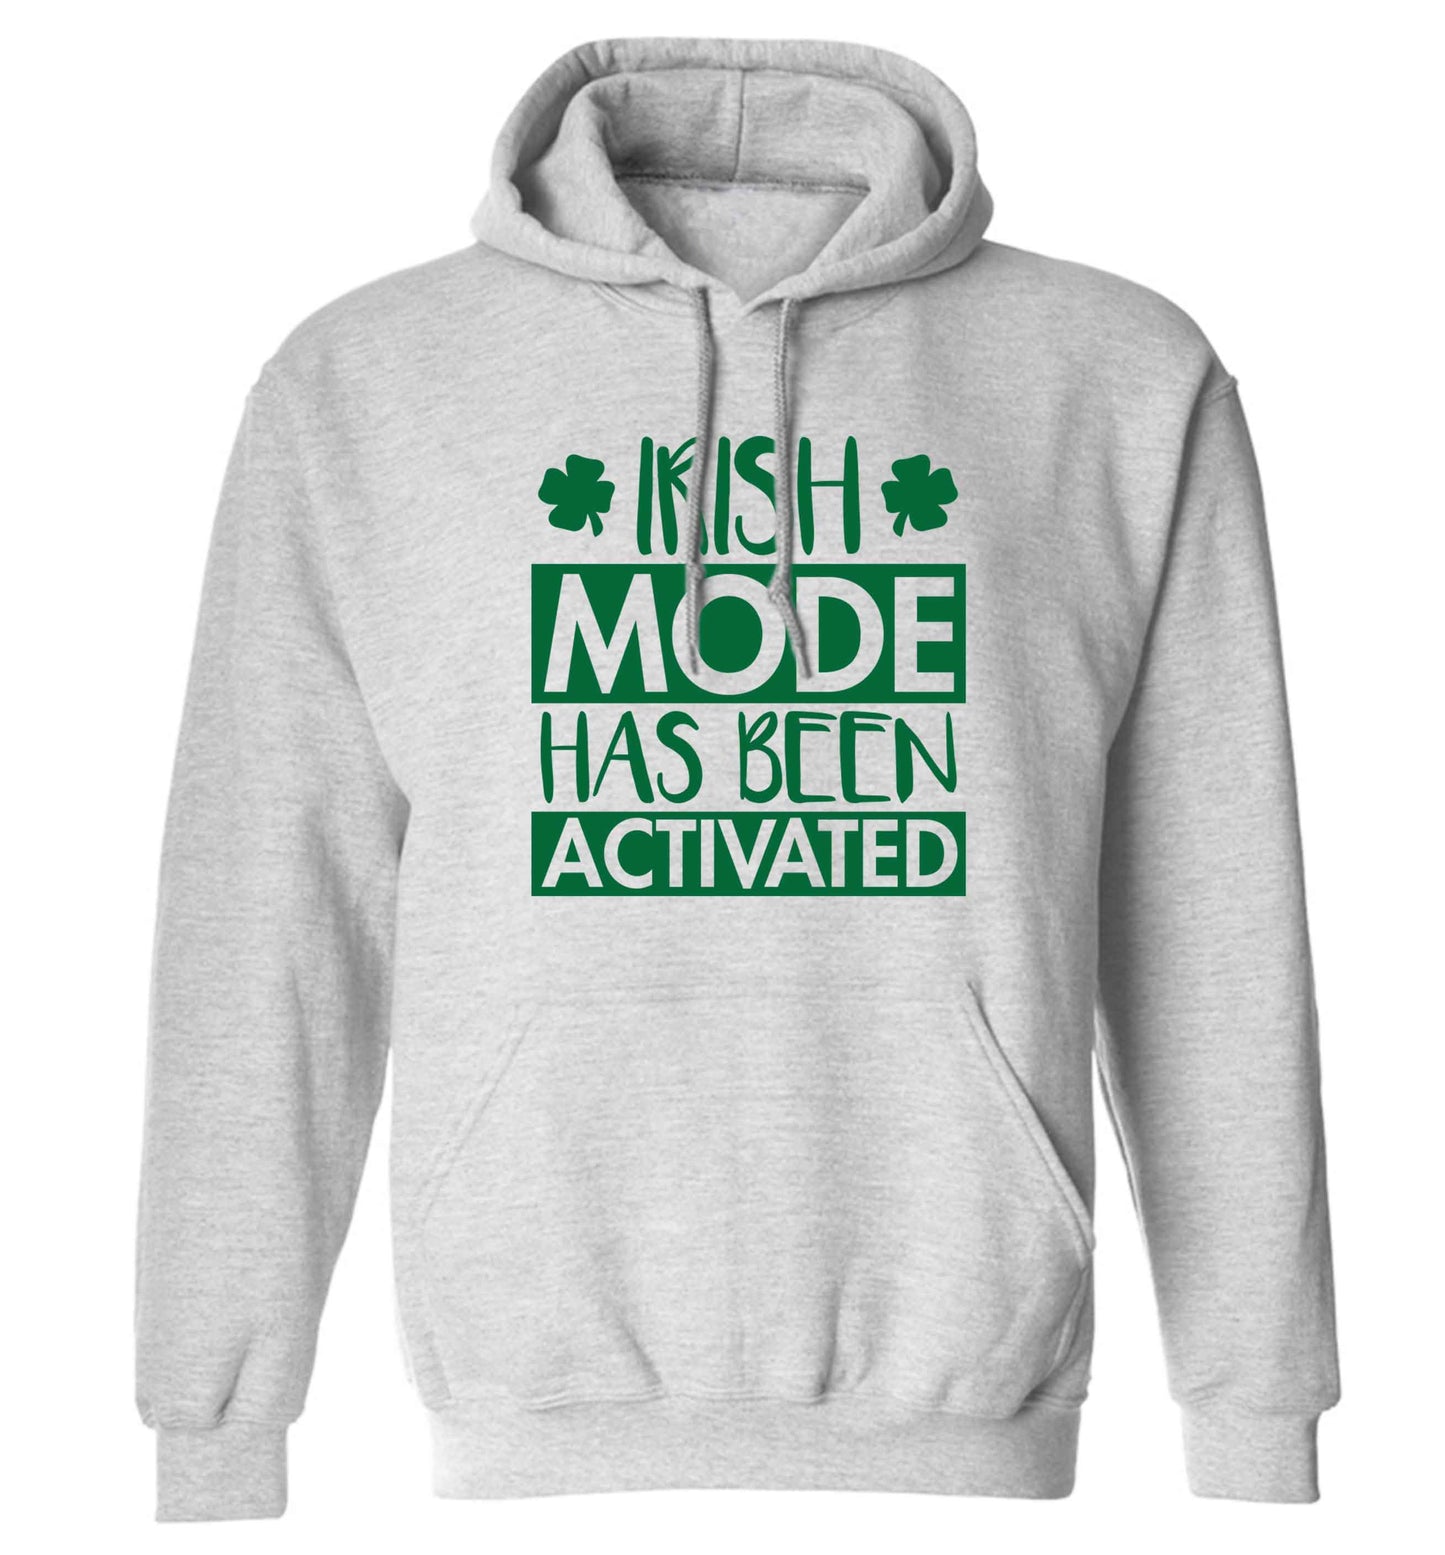 Irish mode has been activated adults unisex grey hoodie 2XL